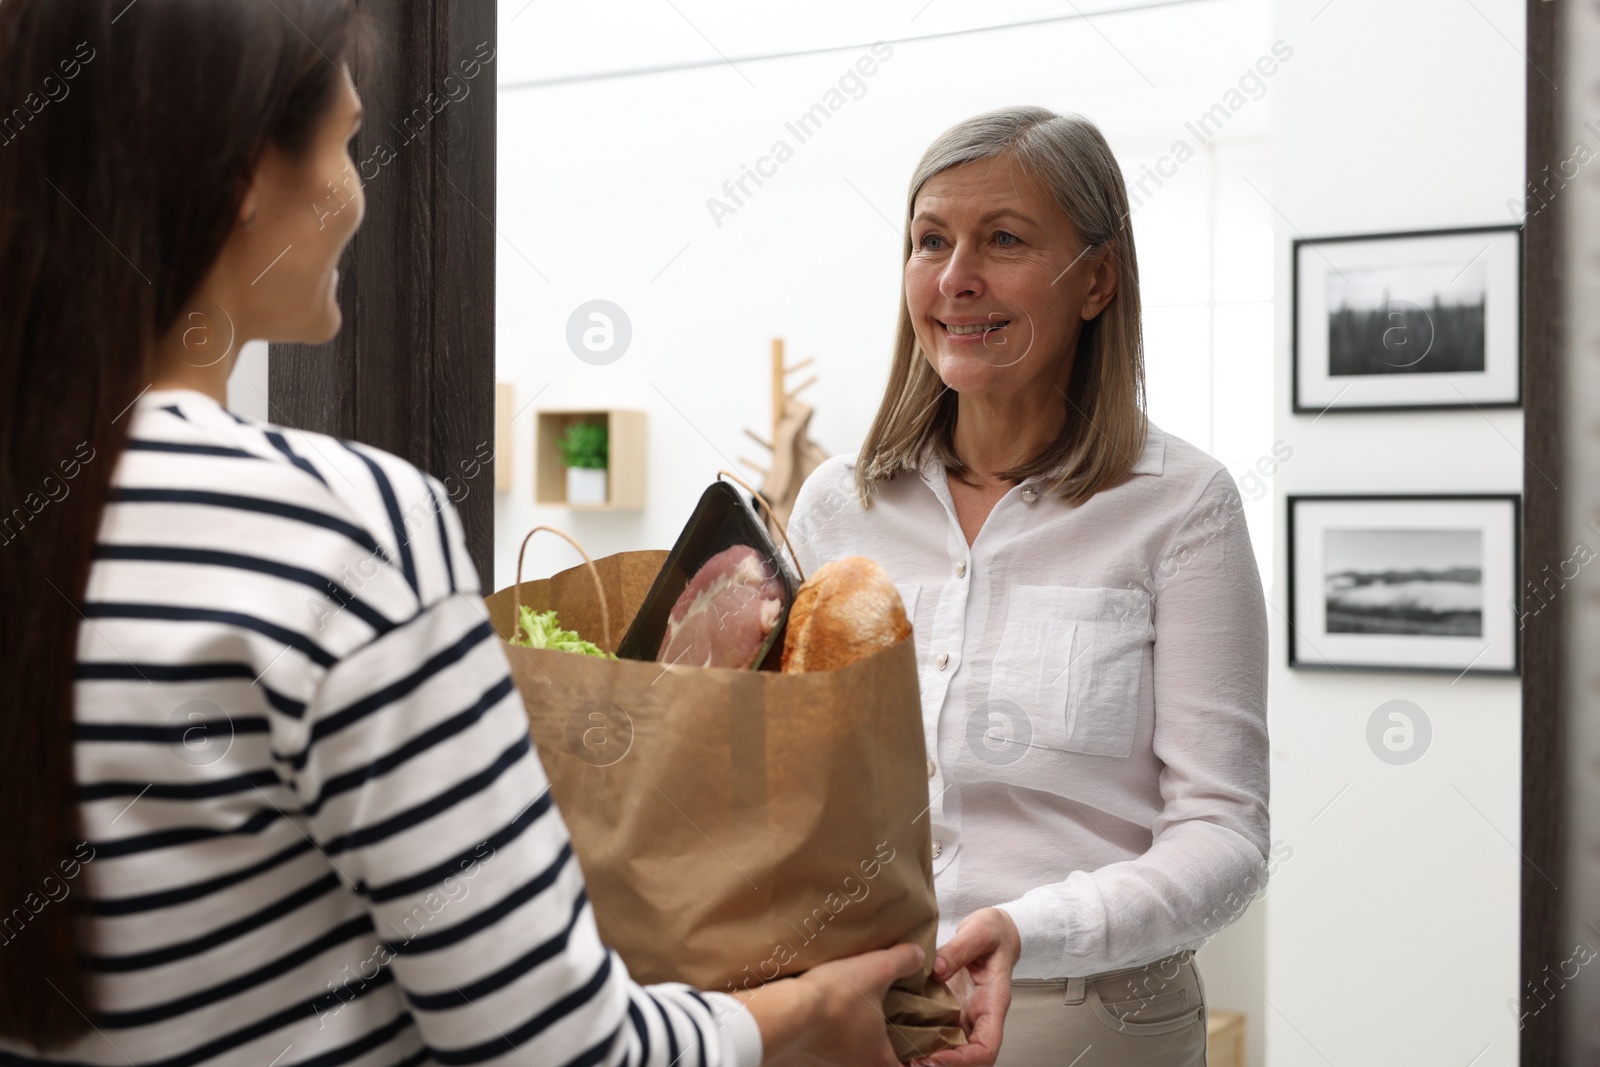 Photo of Courier giving paper bag with food products to senior woman indoors